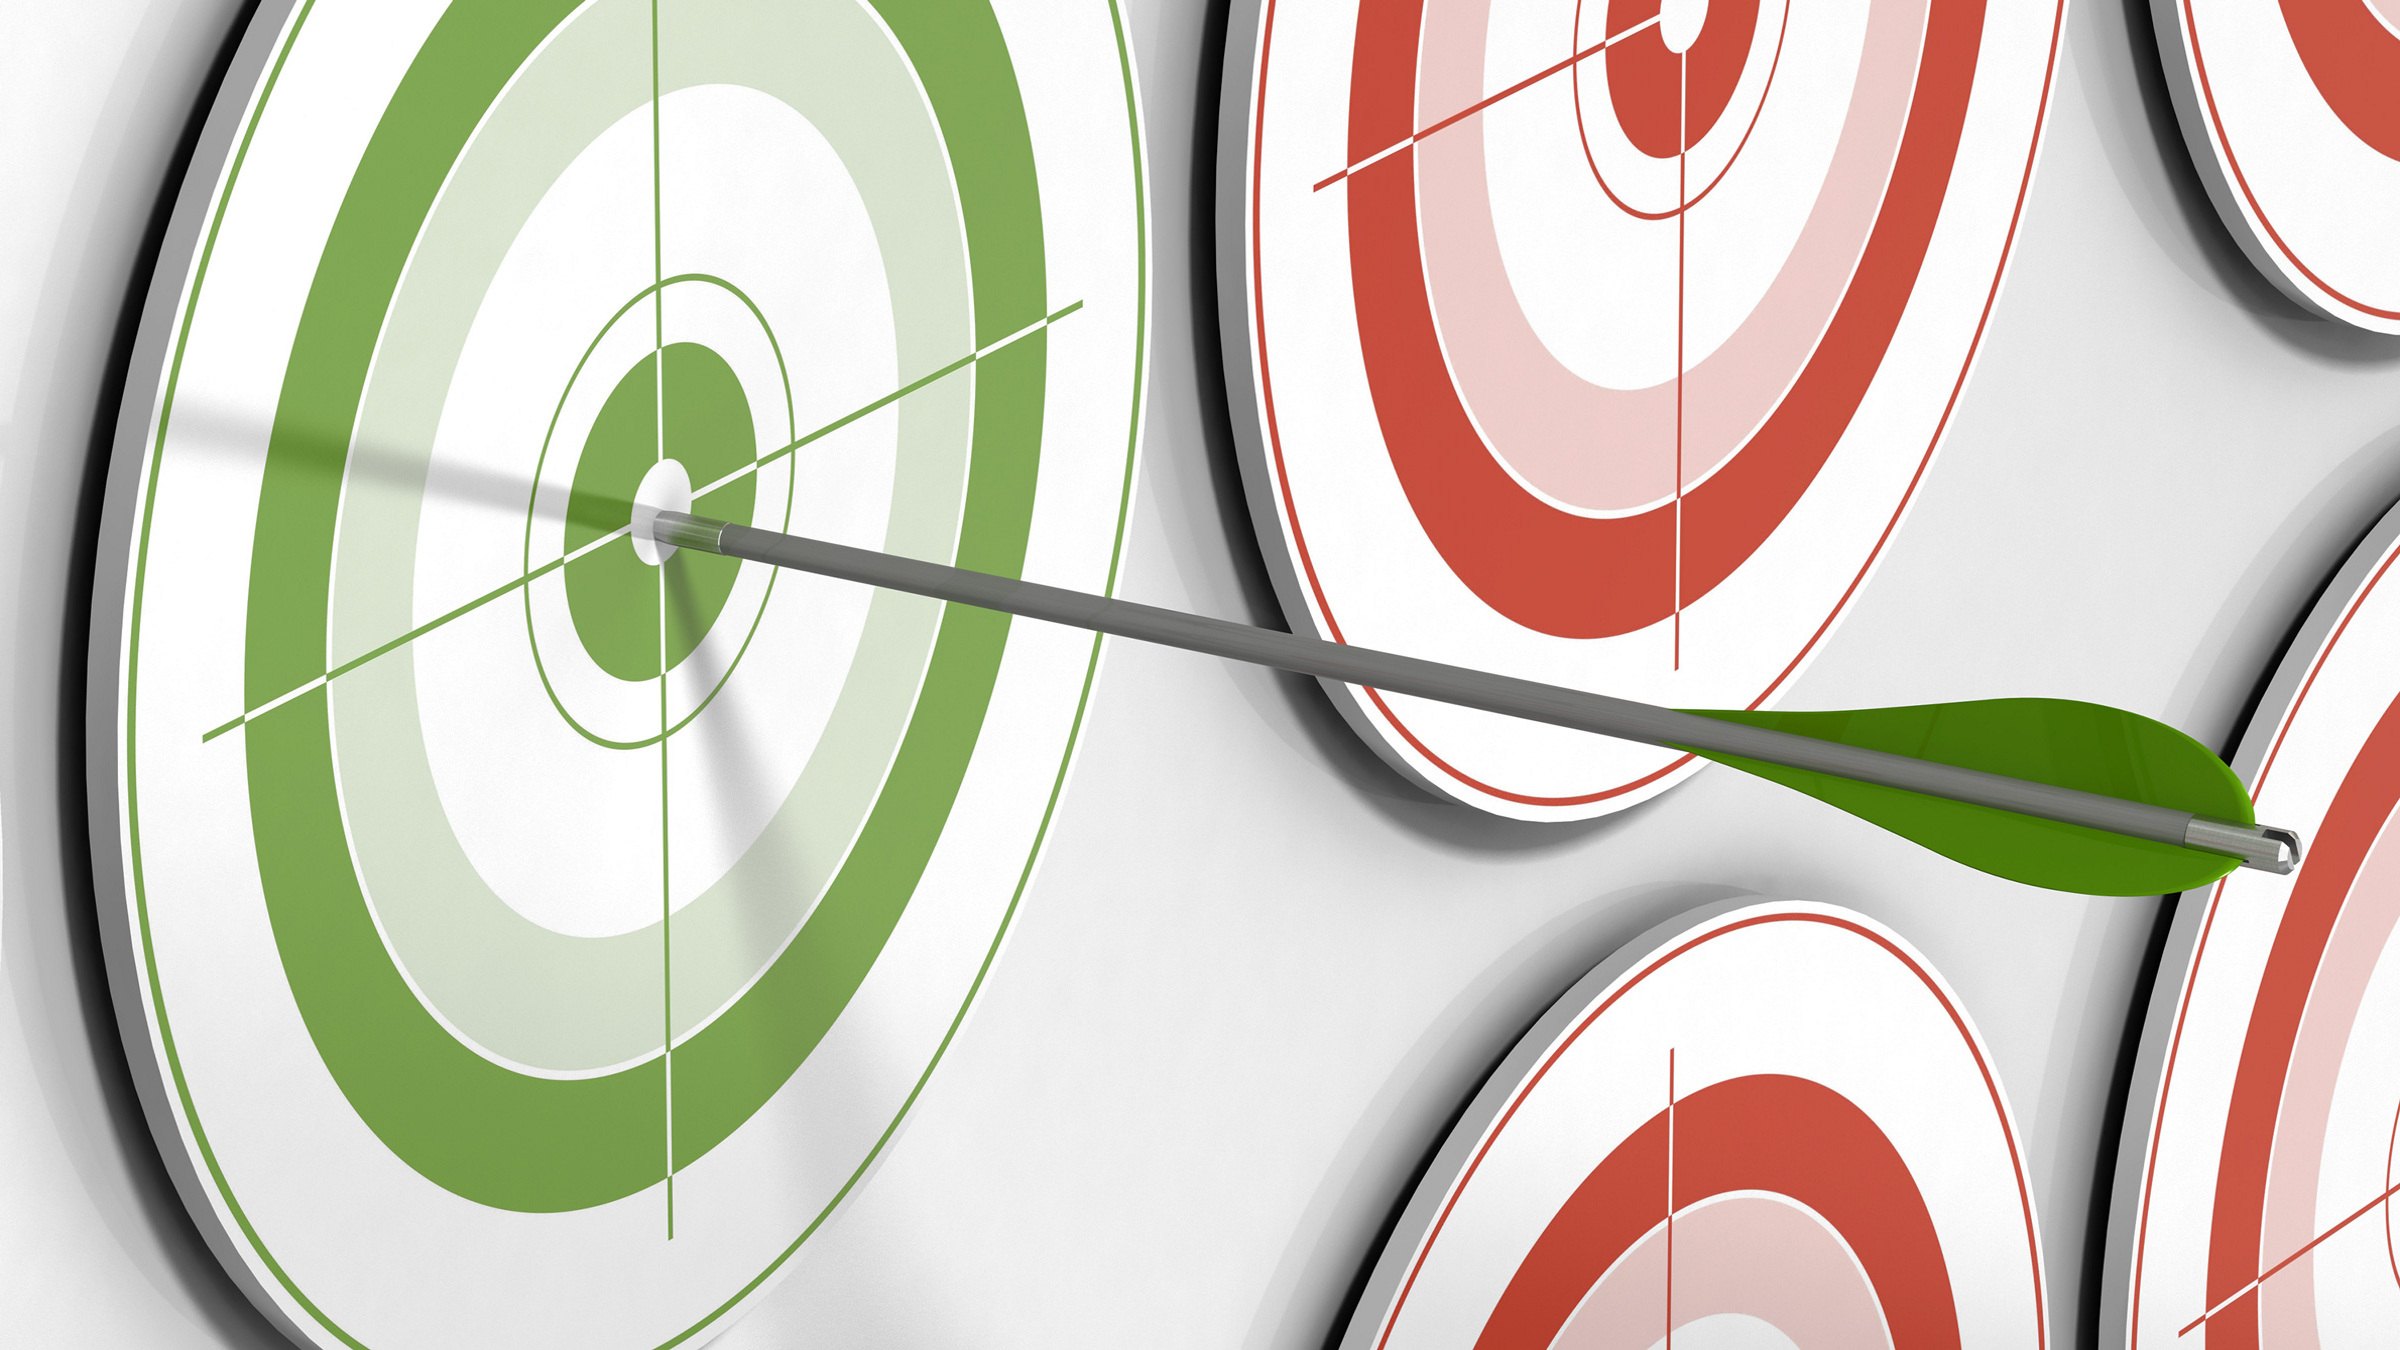 arrow in the bullseye of a green target next to a red target, illustration